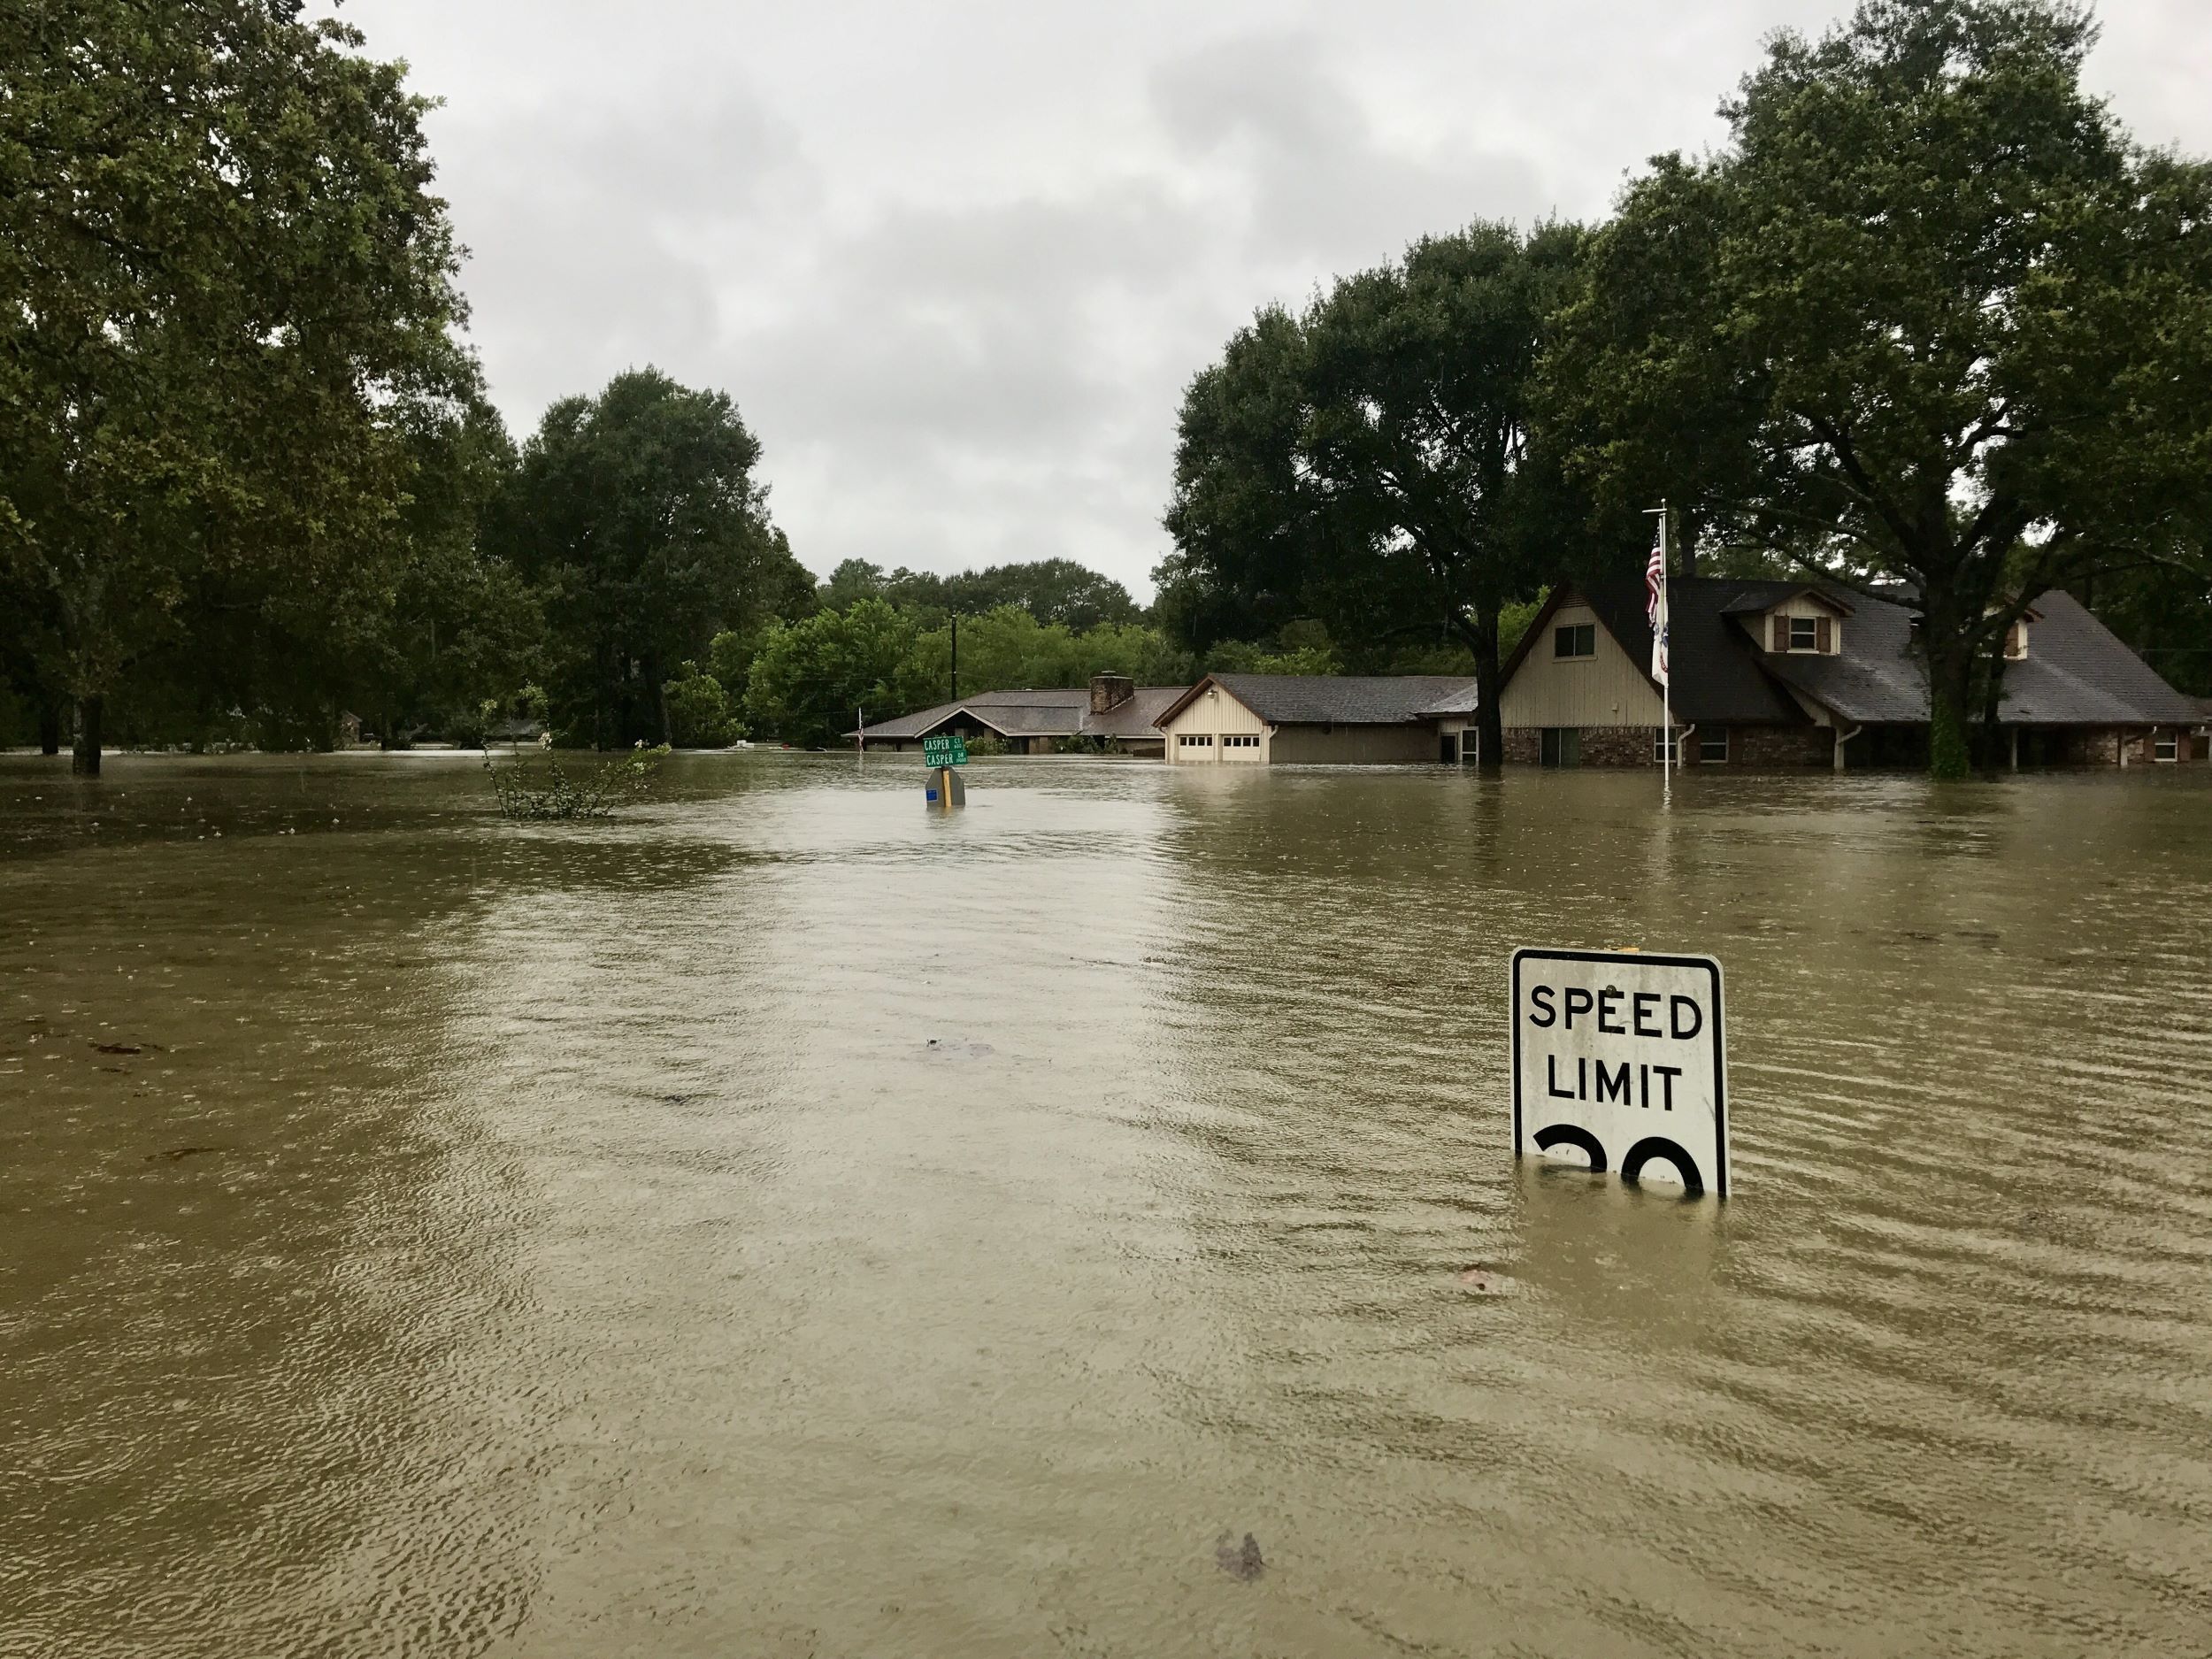 Photo of a flooded community, with water up high enough to almost reach top of street sign. 